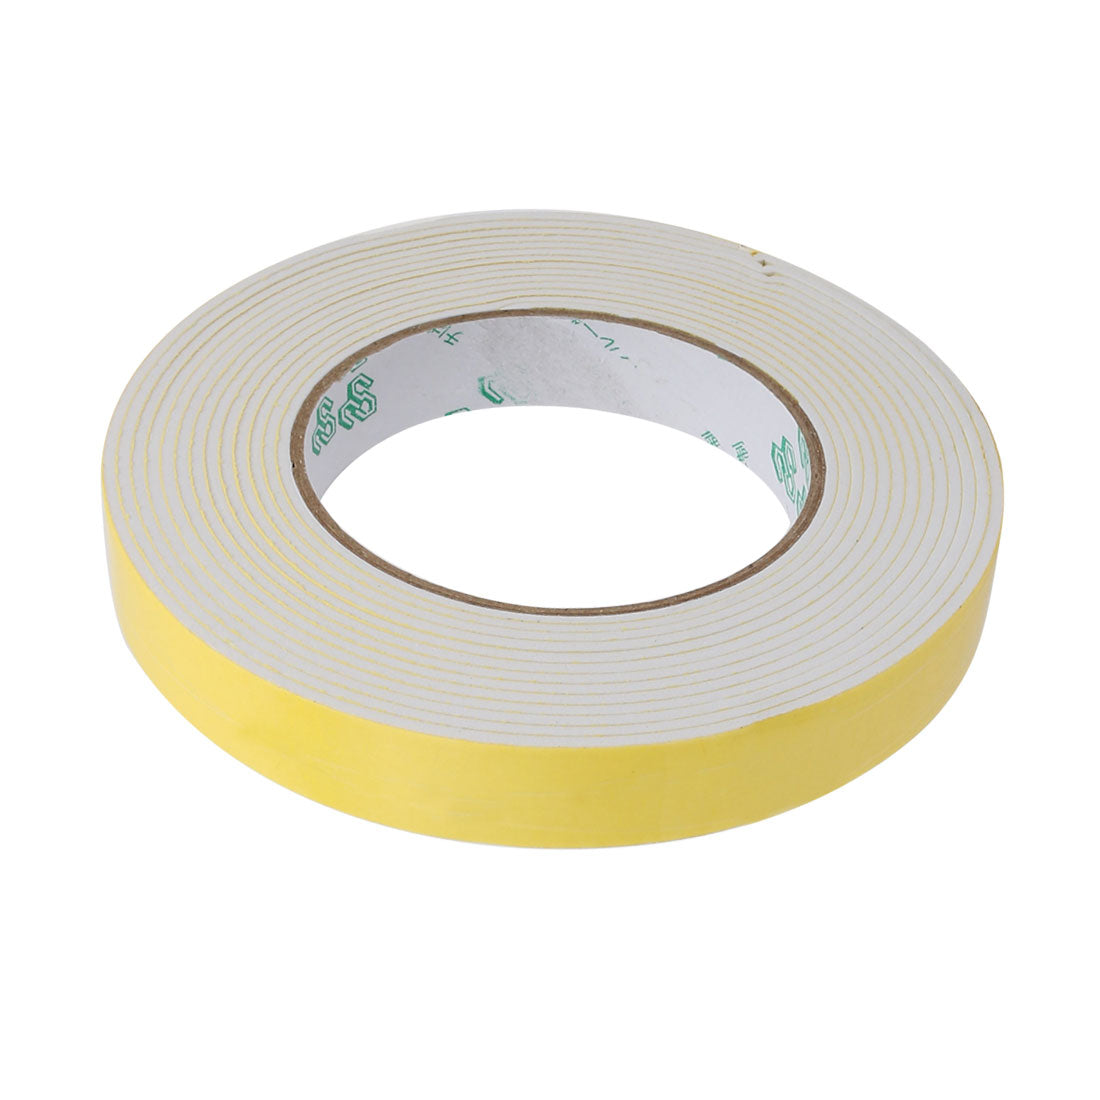 uxcell Uxcell 15mm Width 2mm Thick Single Side Sealed Shockproof Sponge Tape White 5M Length